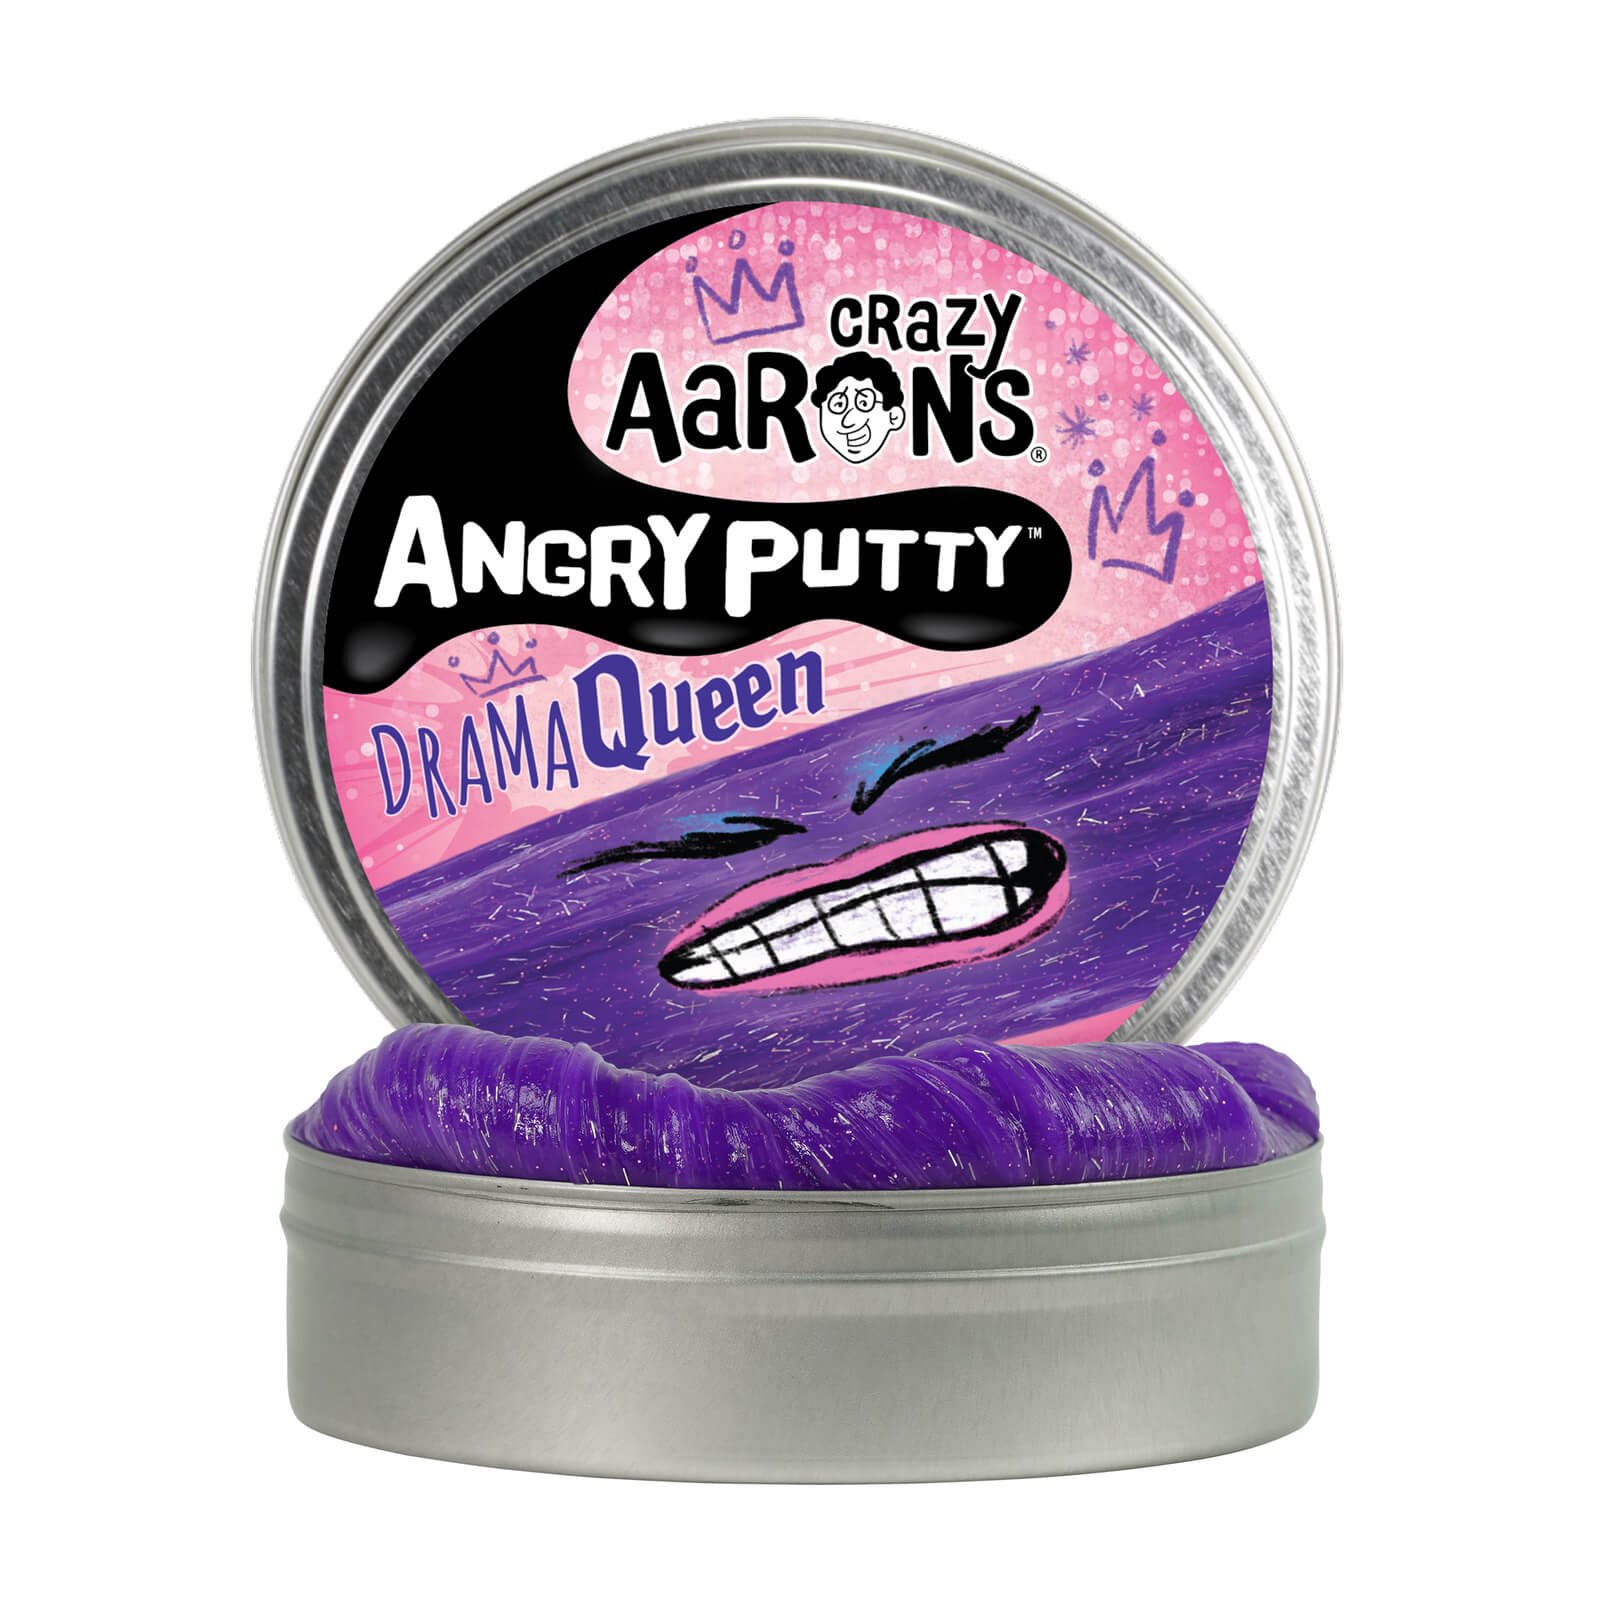 Crazy Aarons Angry Putty